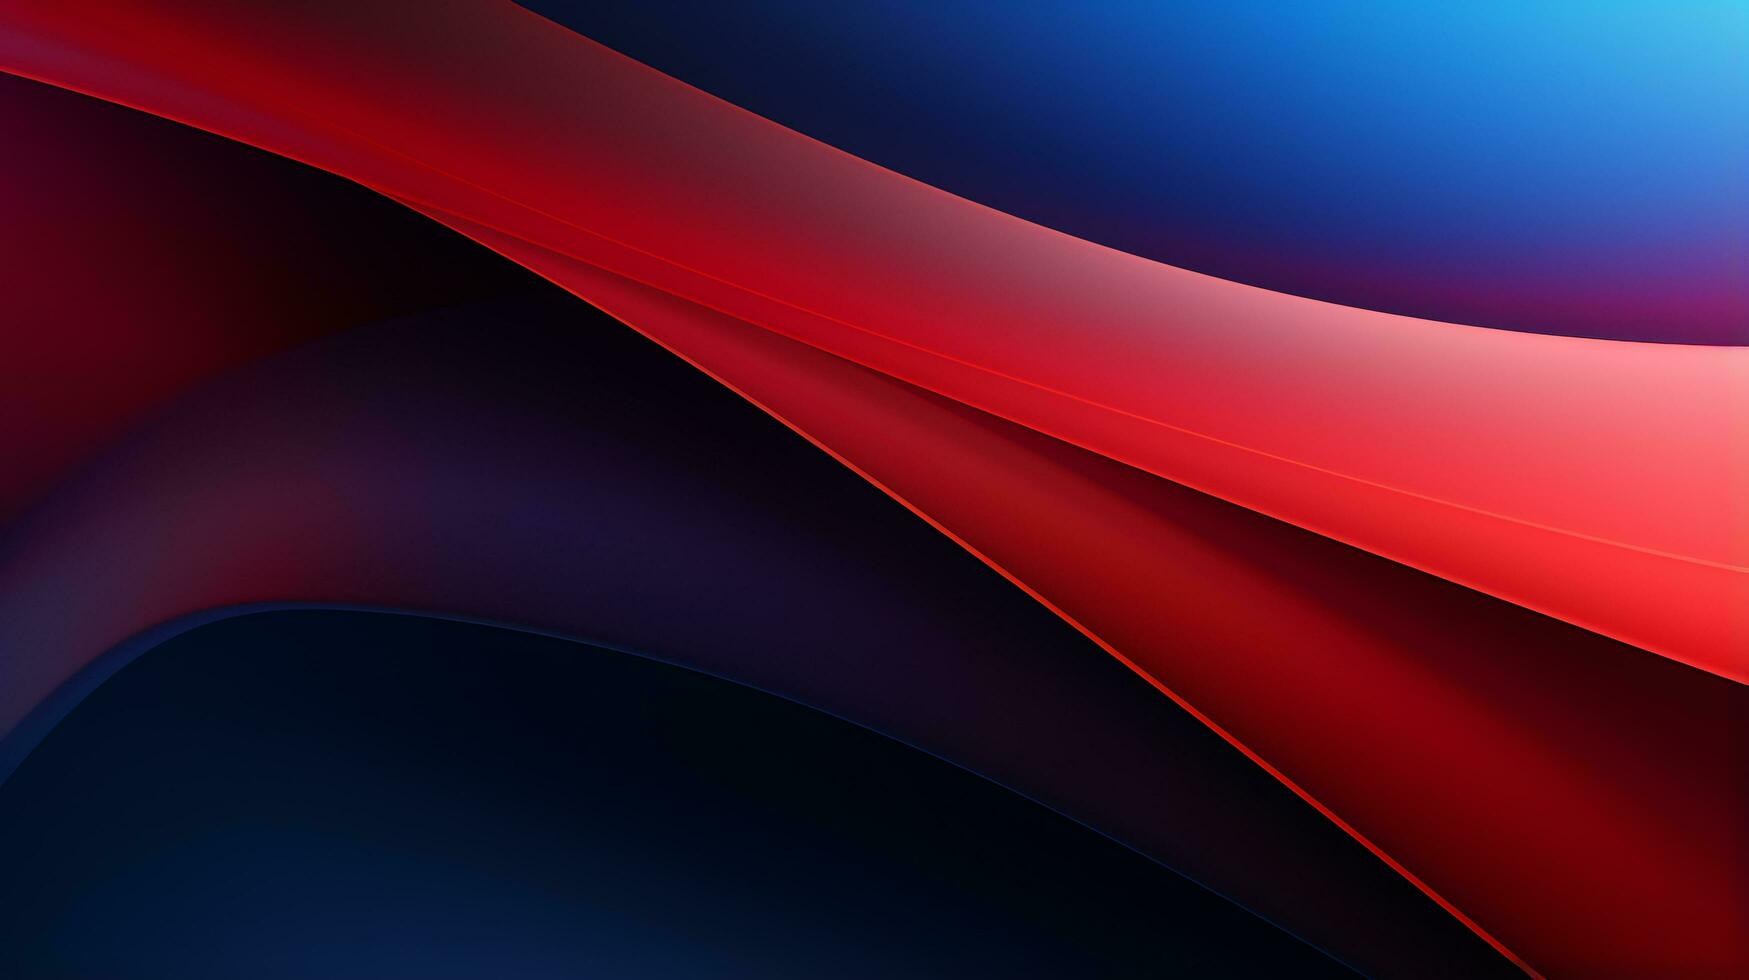 3D dark red and blue abstract wave background photo